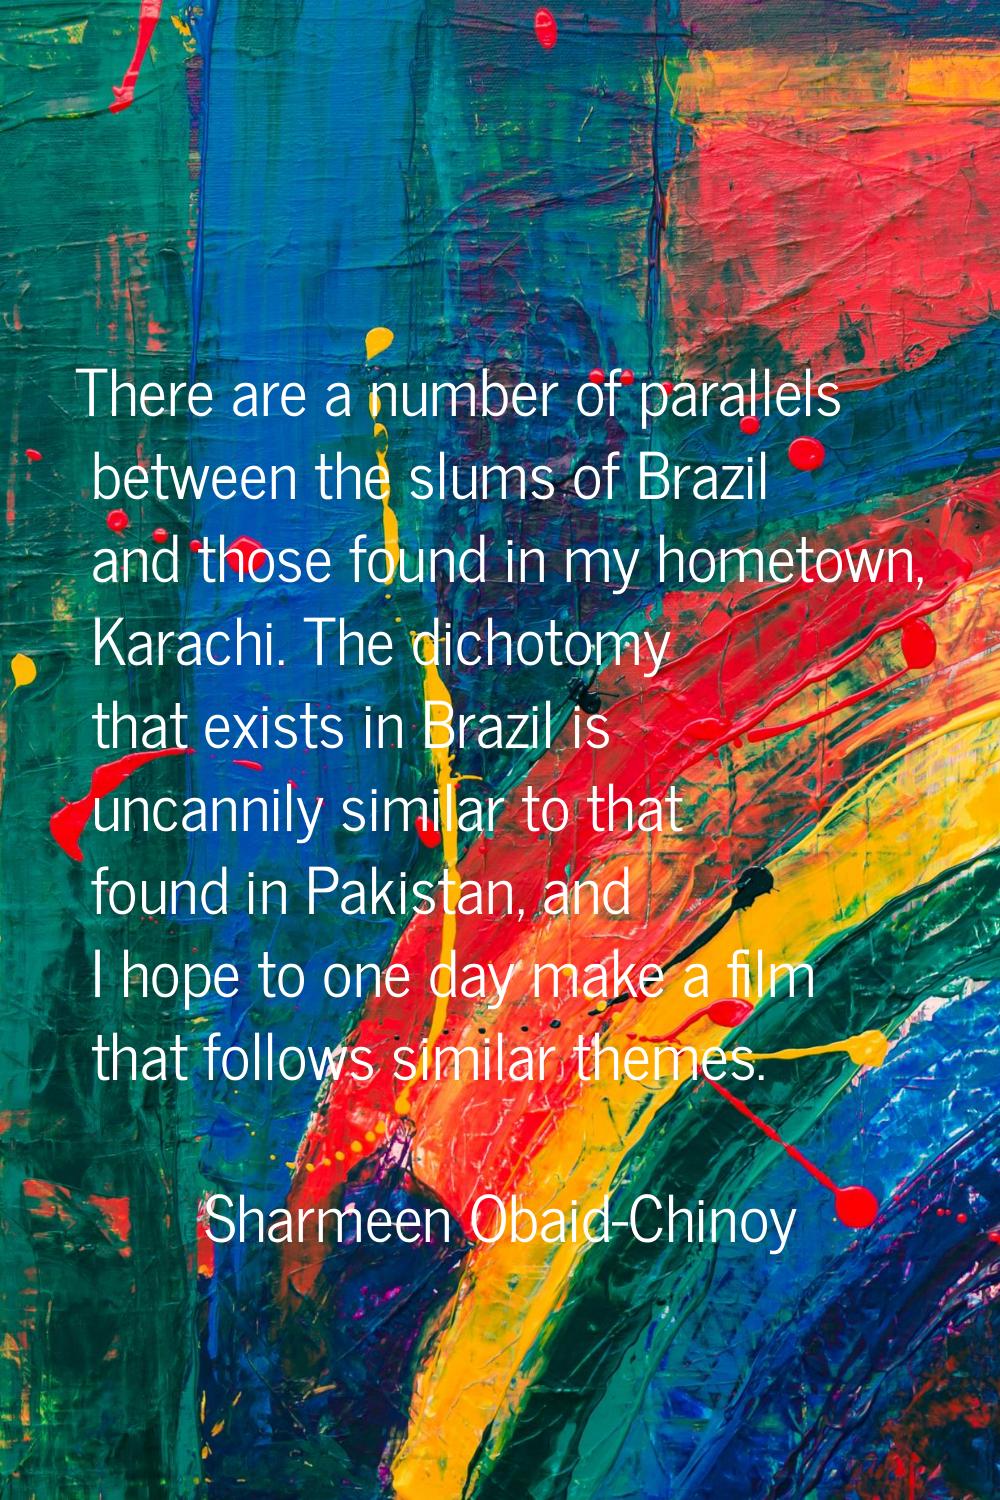 There are a number of parallels between the slums of Brazil and those found in my hometown, Karachi